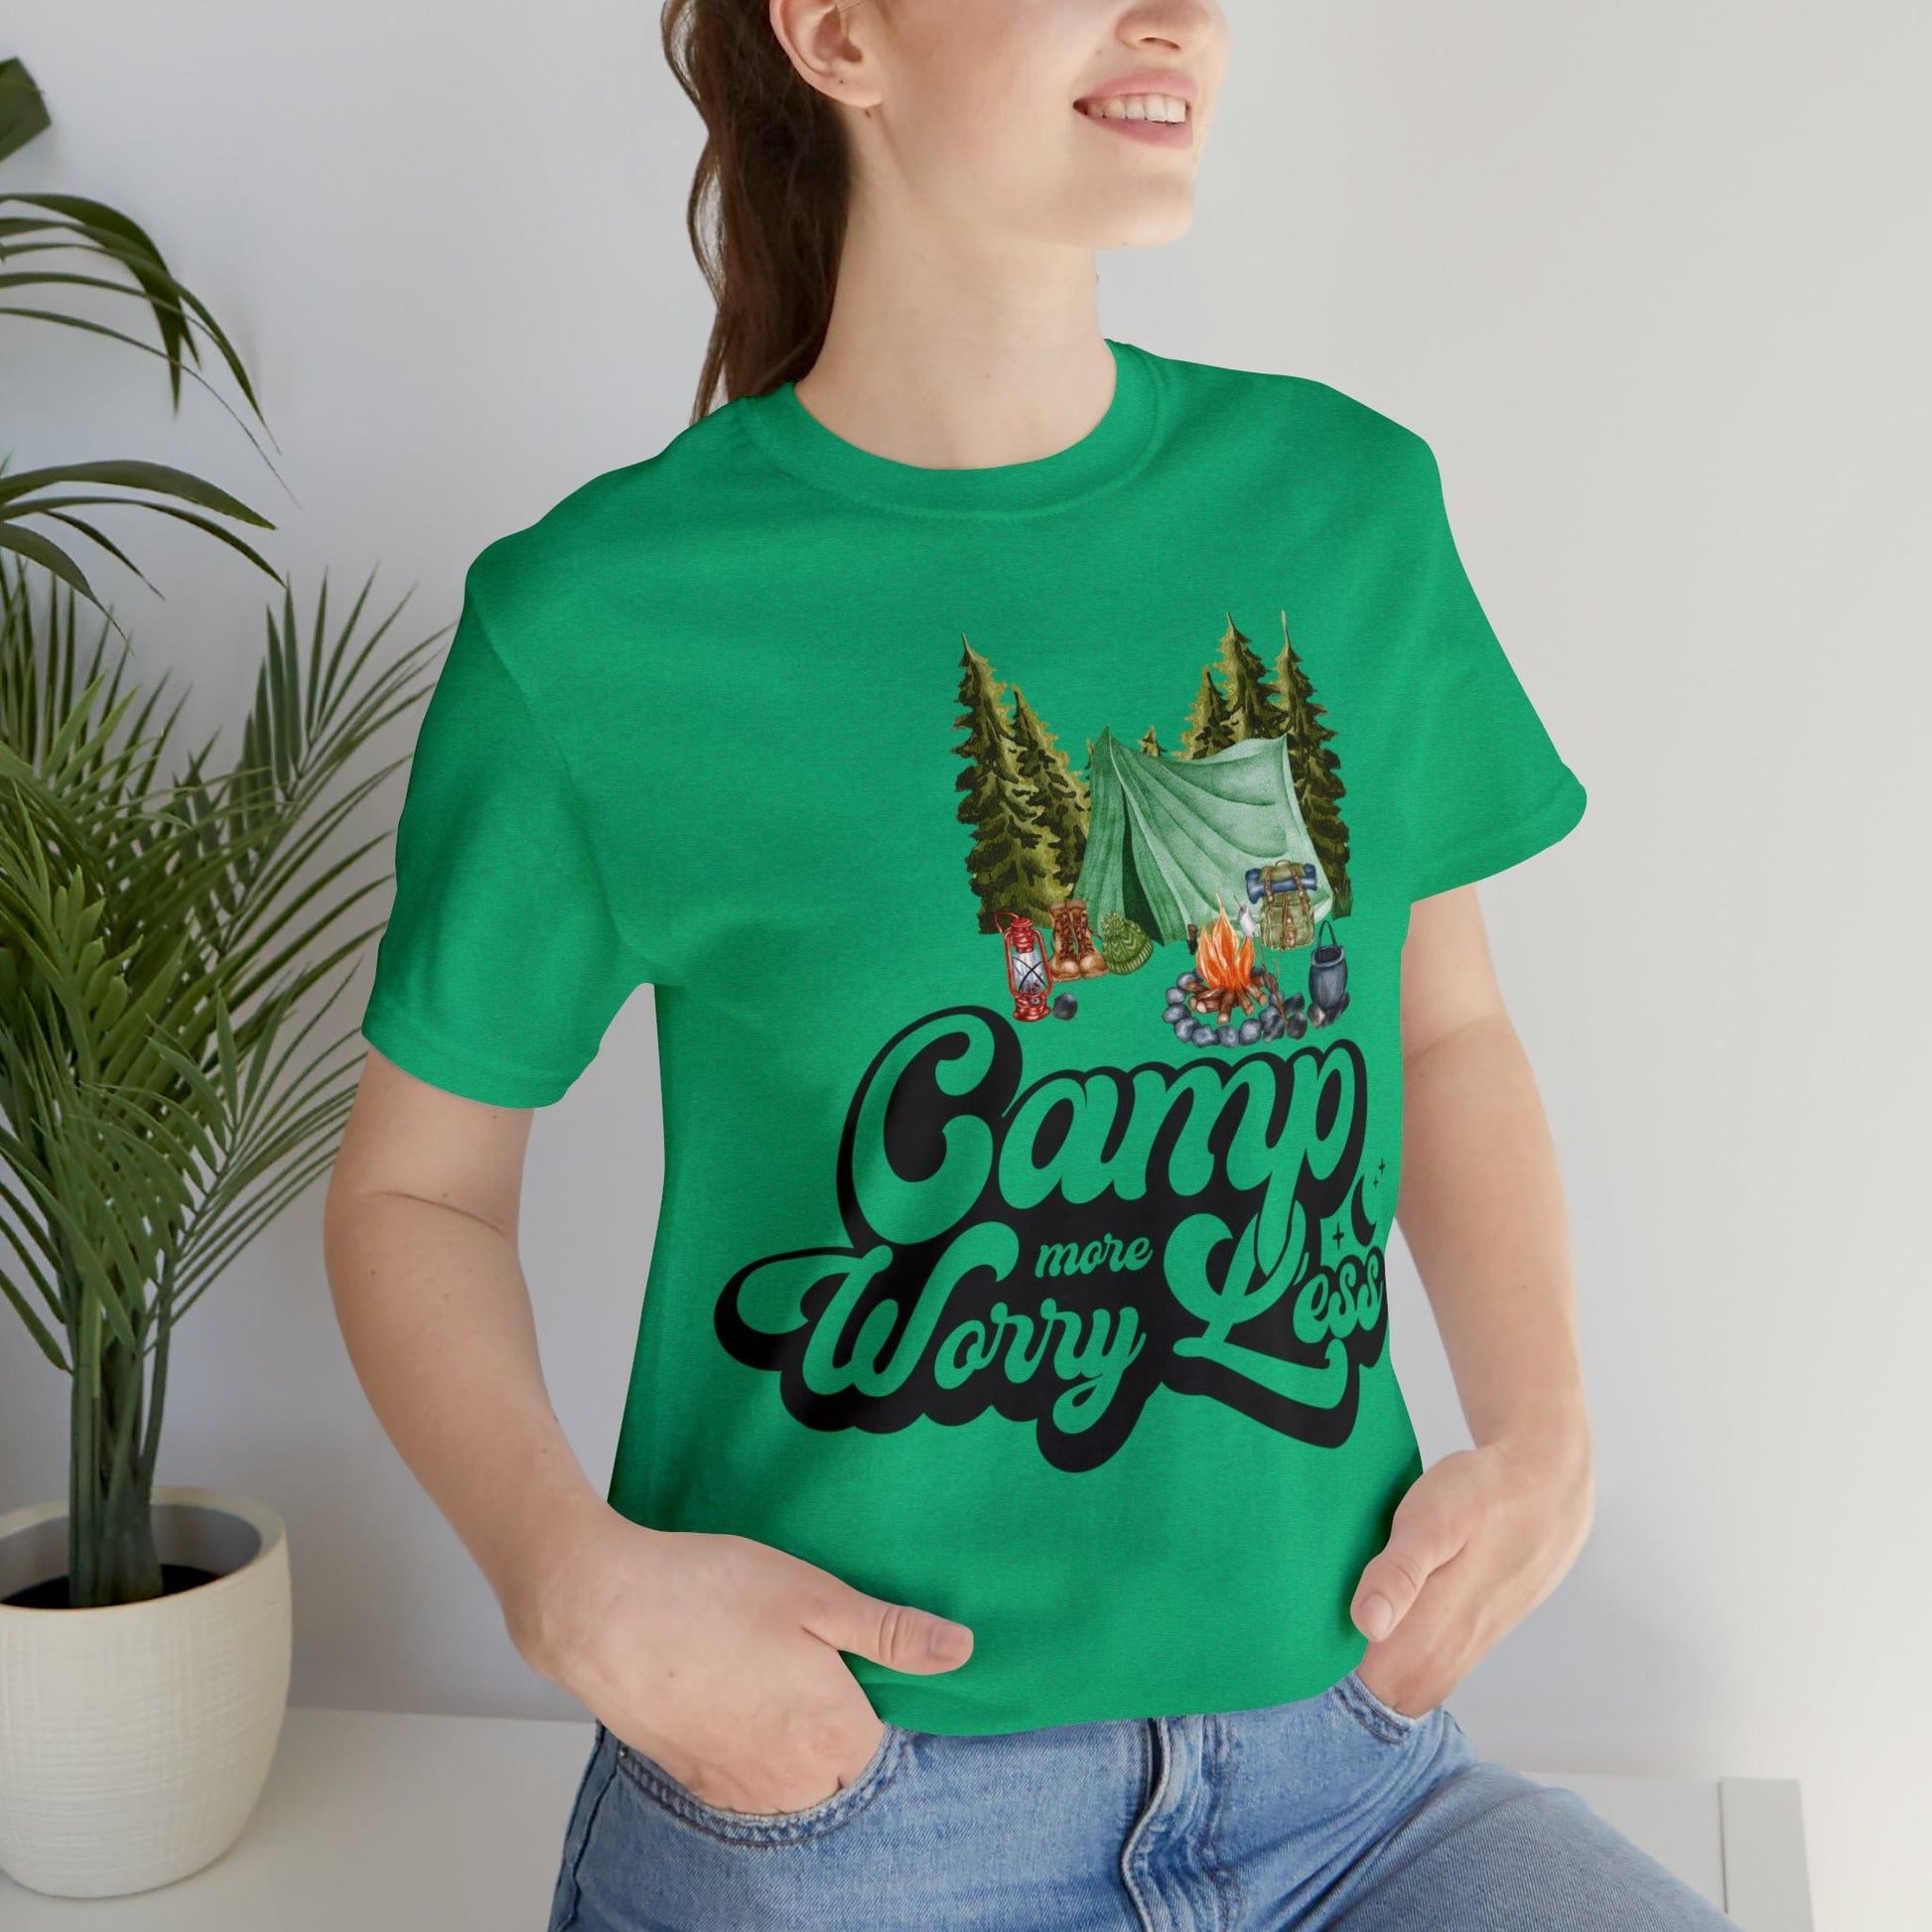 Camp More Worry Less Shirt, Outdoor adventure clothing, Nature-inspired shirts, Hiking apparel, Outdoor enthusiasts gift, Adventure-themed attire - Giftsmojo